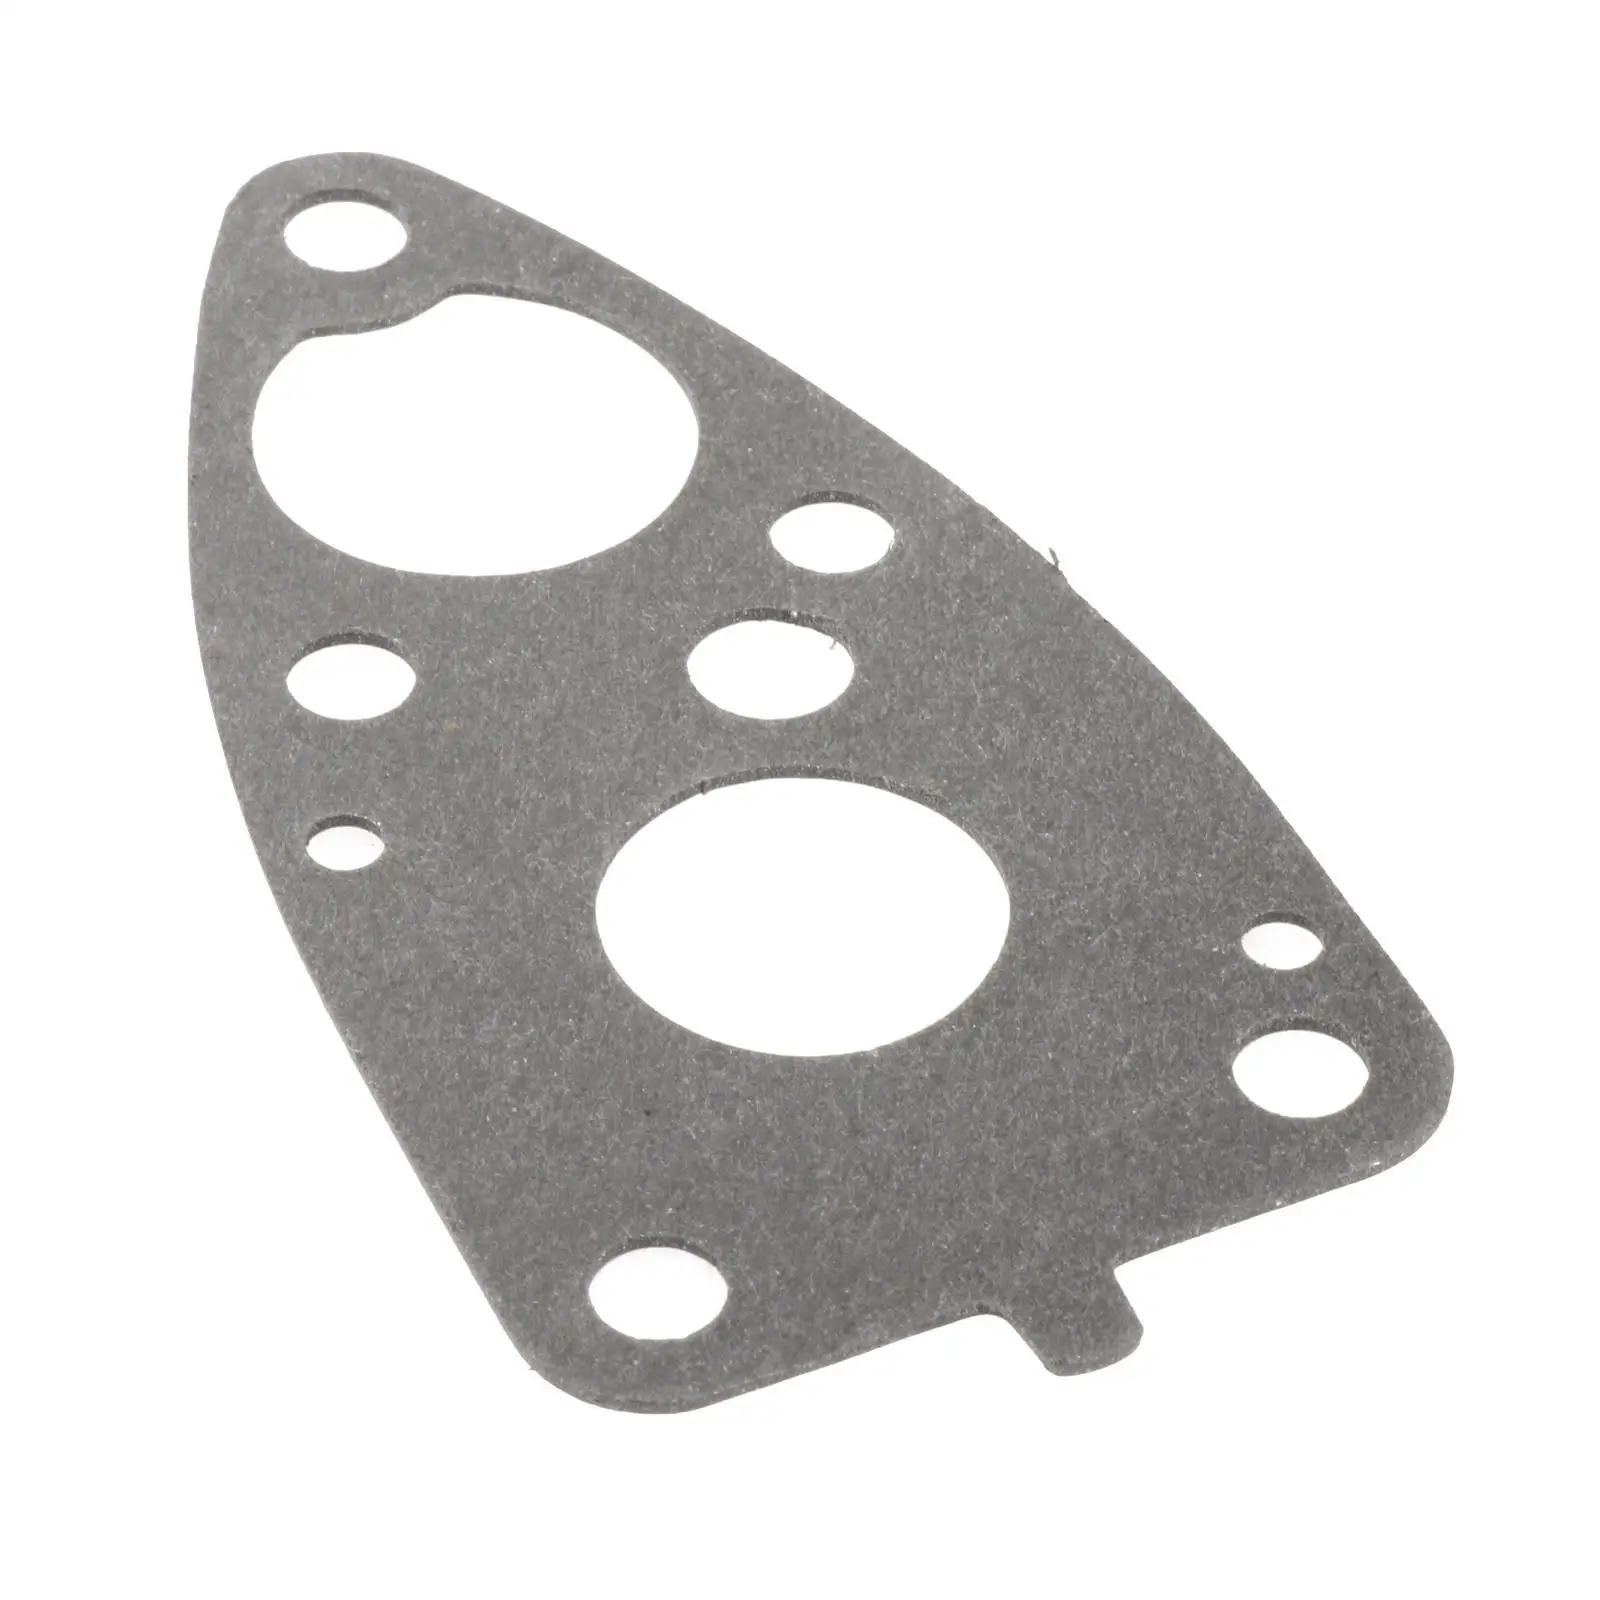 Packing Lower Case, Accessories Parts Lower Gear Case Plate Gasket Water Pump Plate for Yamaha F4A 4A 4B 5C 6E0-45315-A0-00